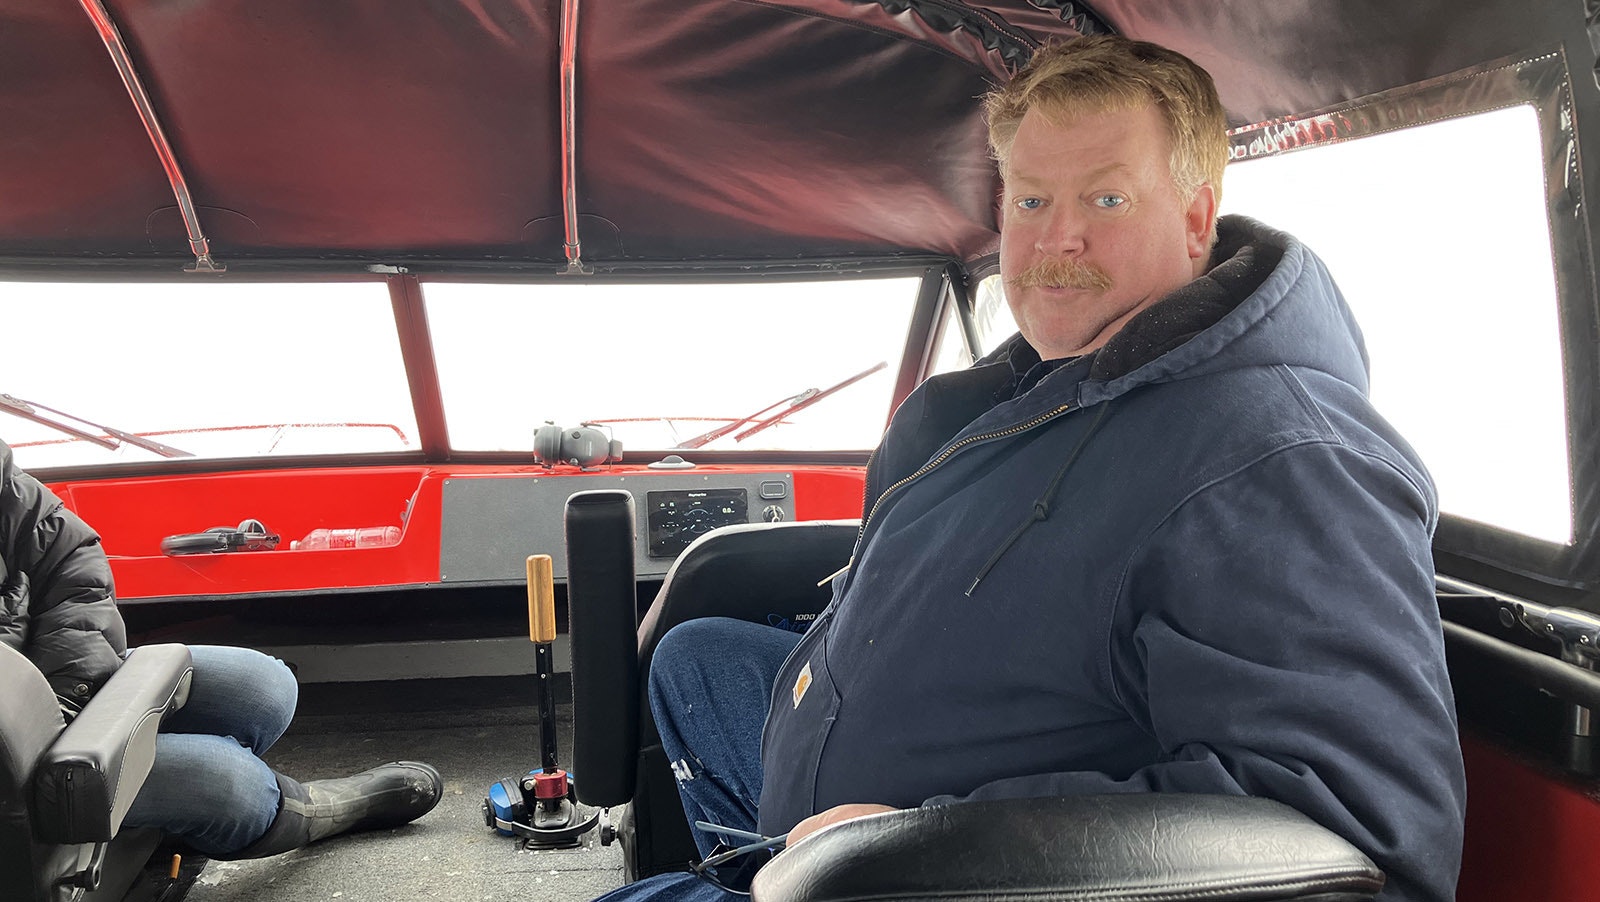 Glendo State Park Superintendent Brian Johnson believes the airboat is a great way to explore the reservoir during the winter.